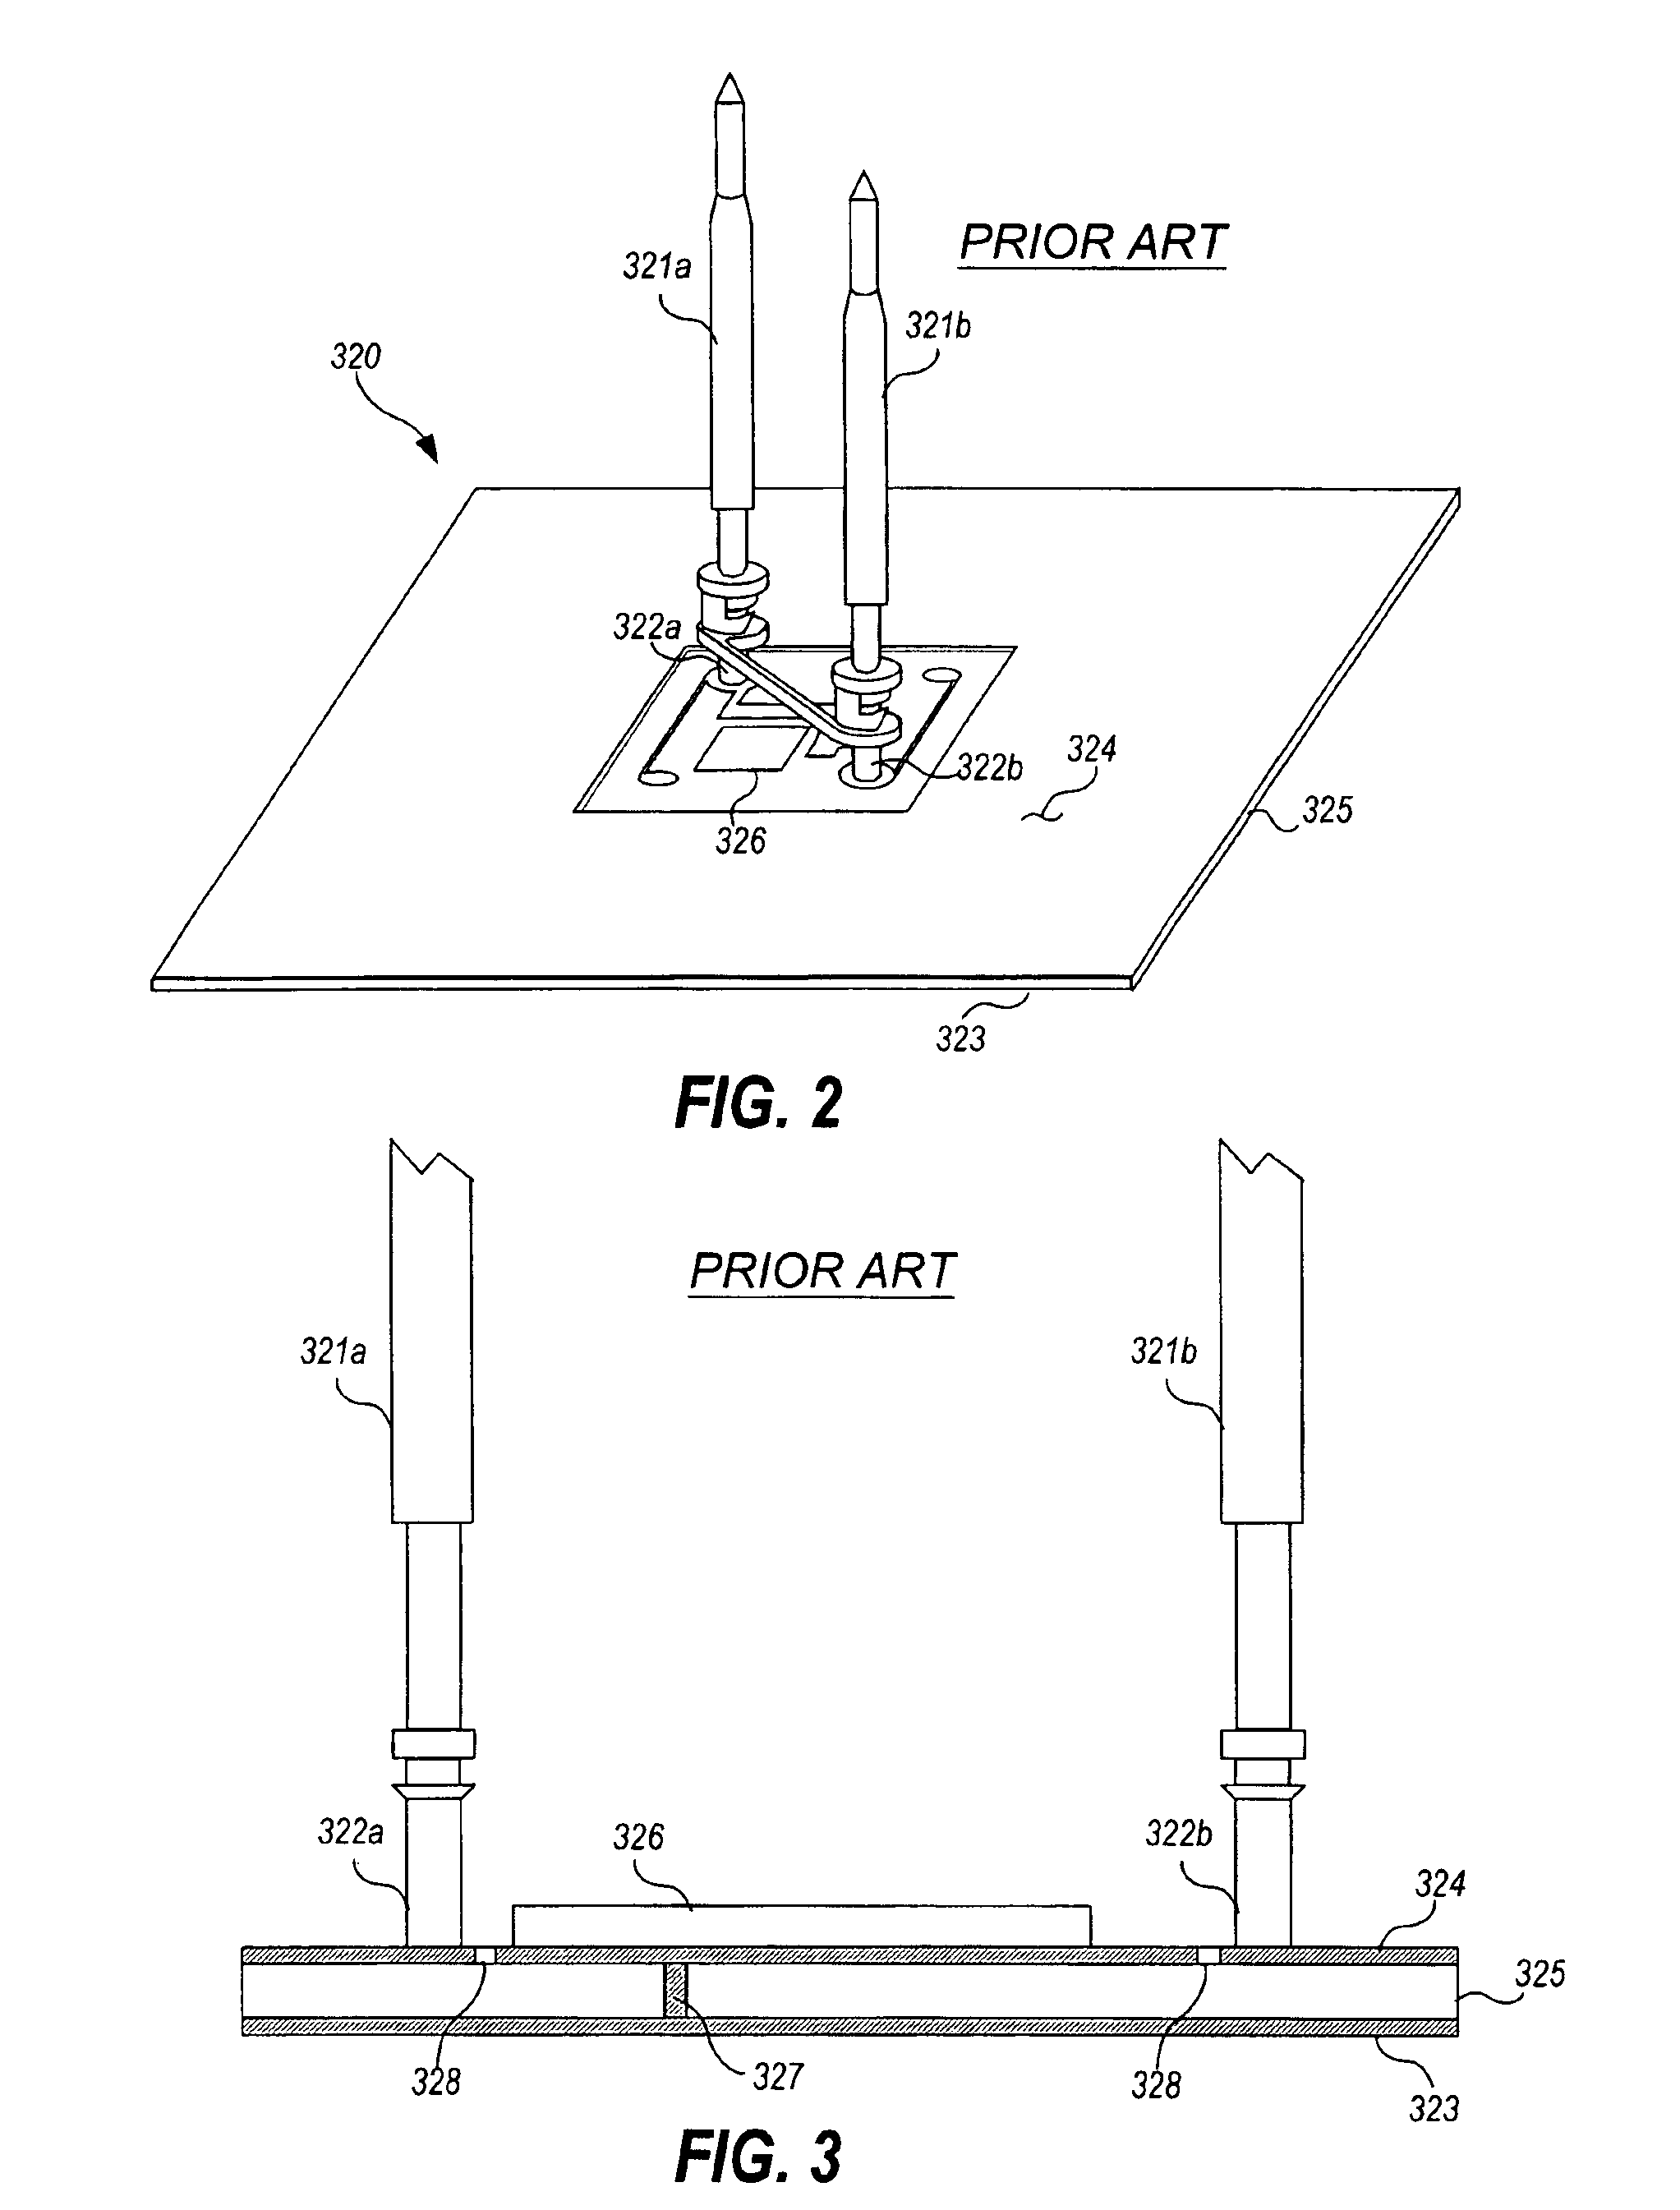 Capacitive probe assembly with flex circuit